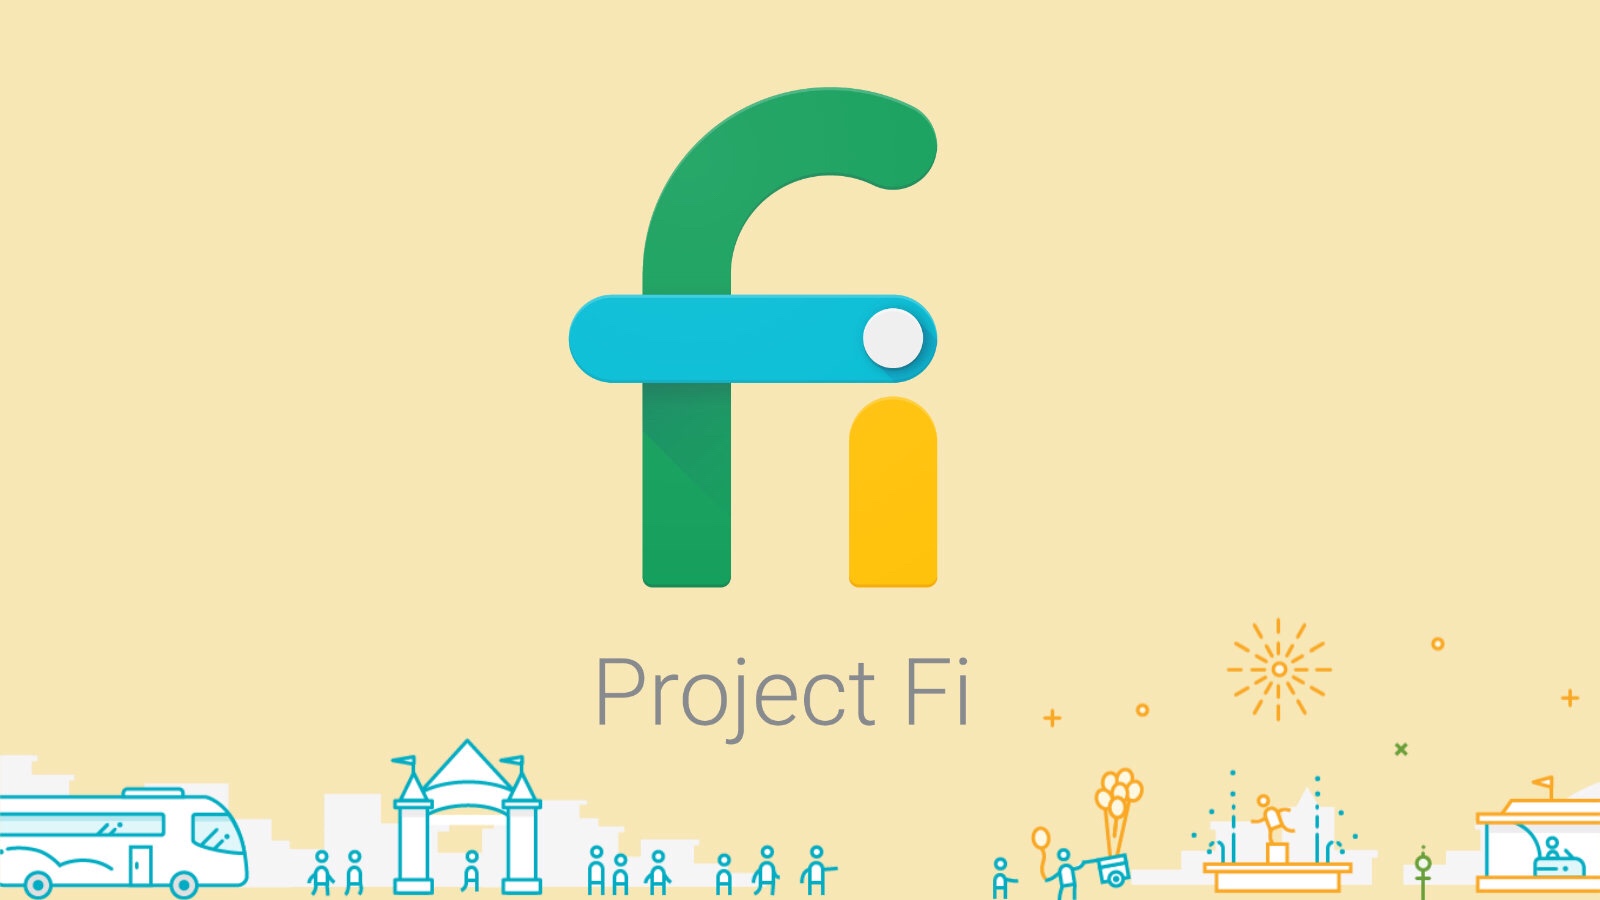 Google’s Project Fi will now offer unlimited data (there’s a catch)